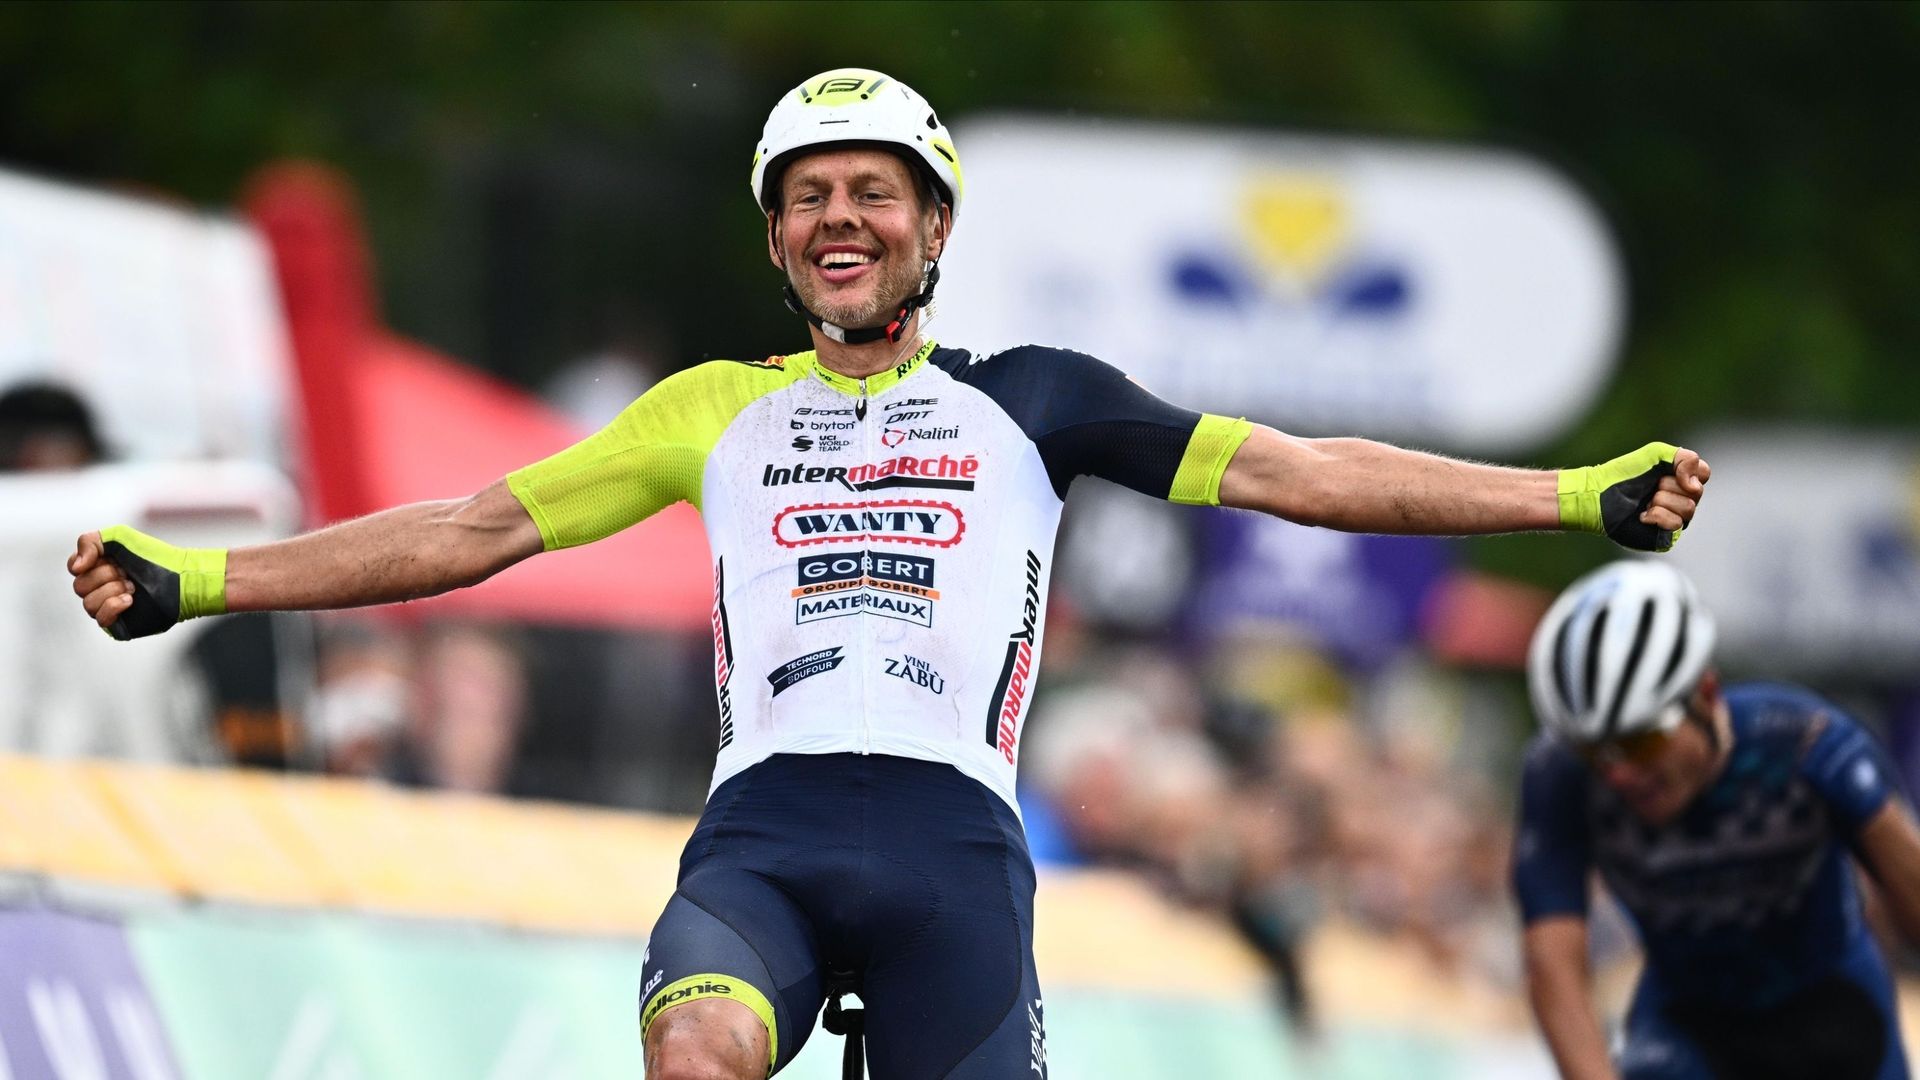 Brussels Cycling Classic: Taco van der Horn vince a sorpresa Thymo Willems, assediato Peloton